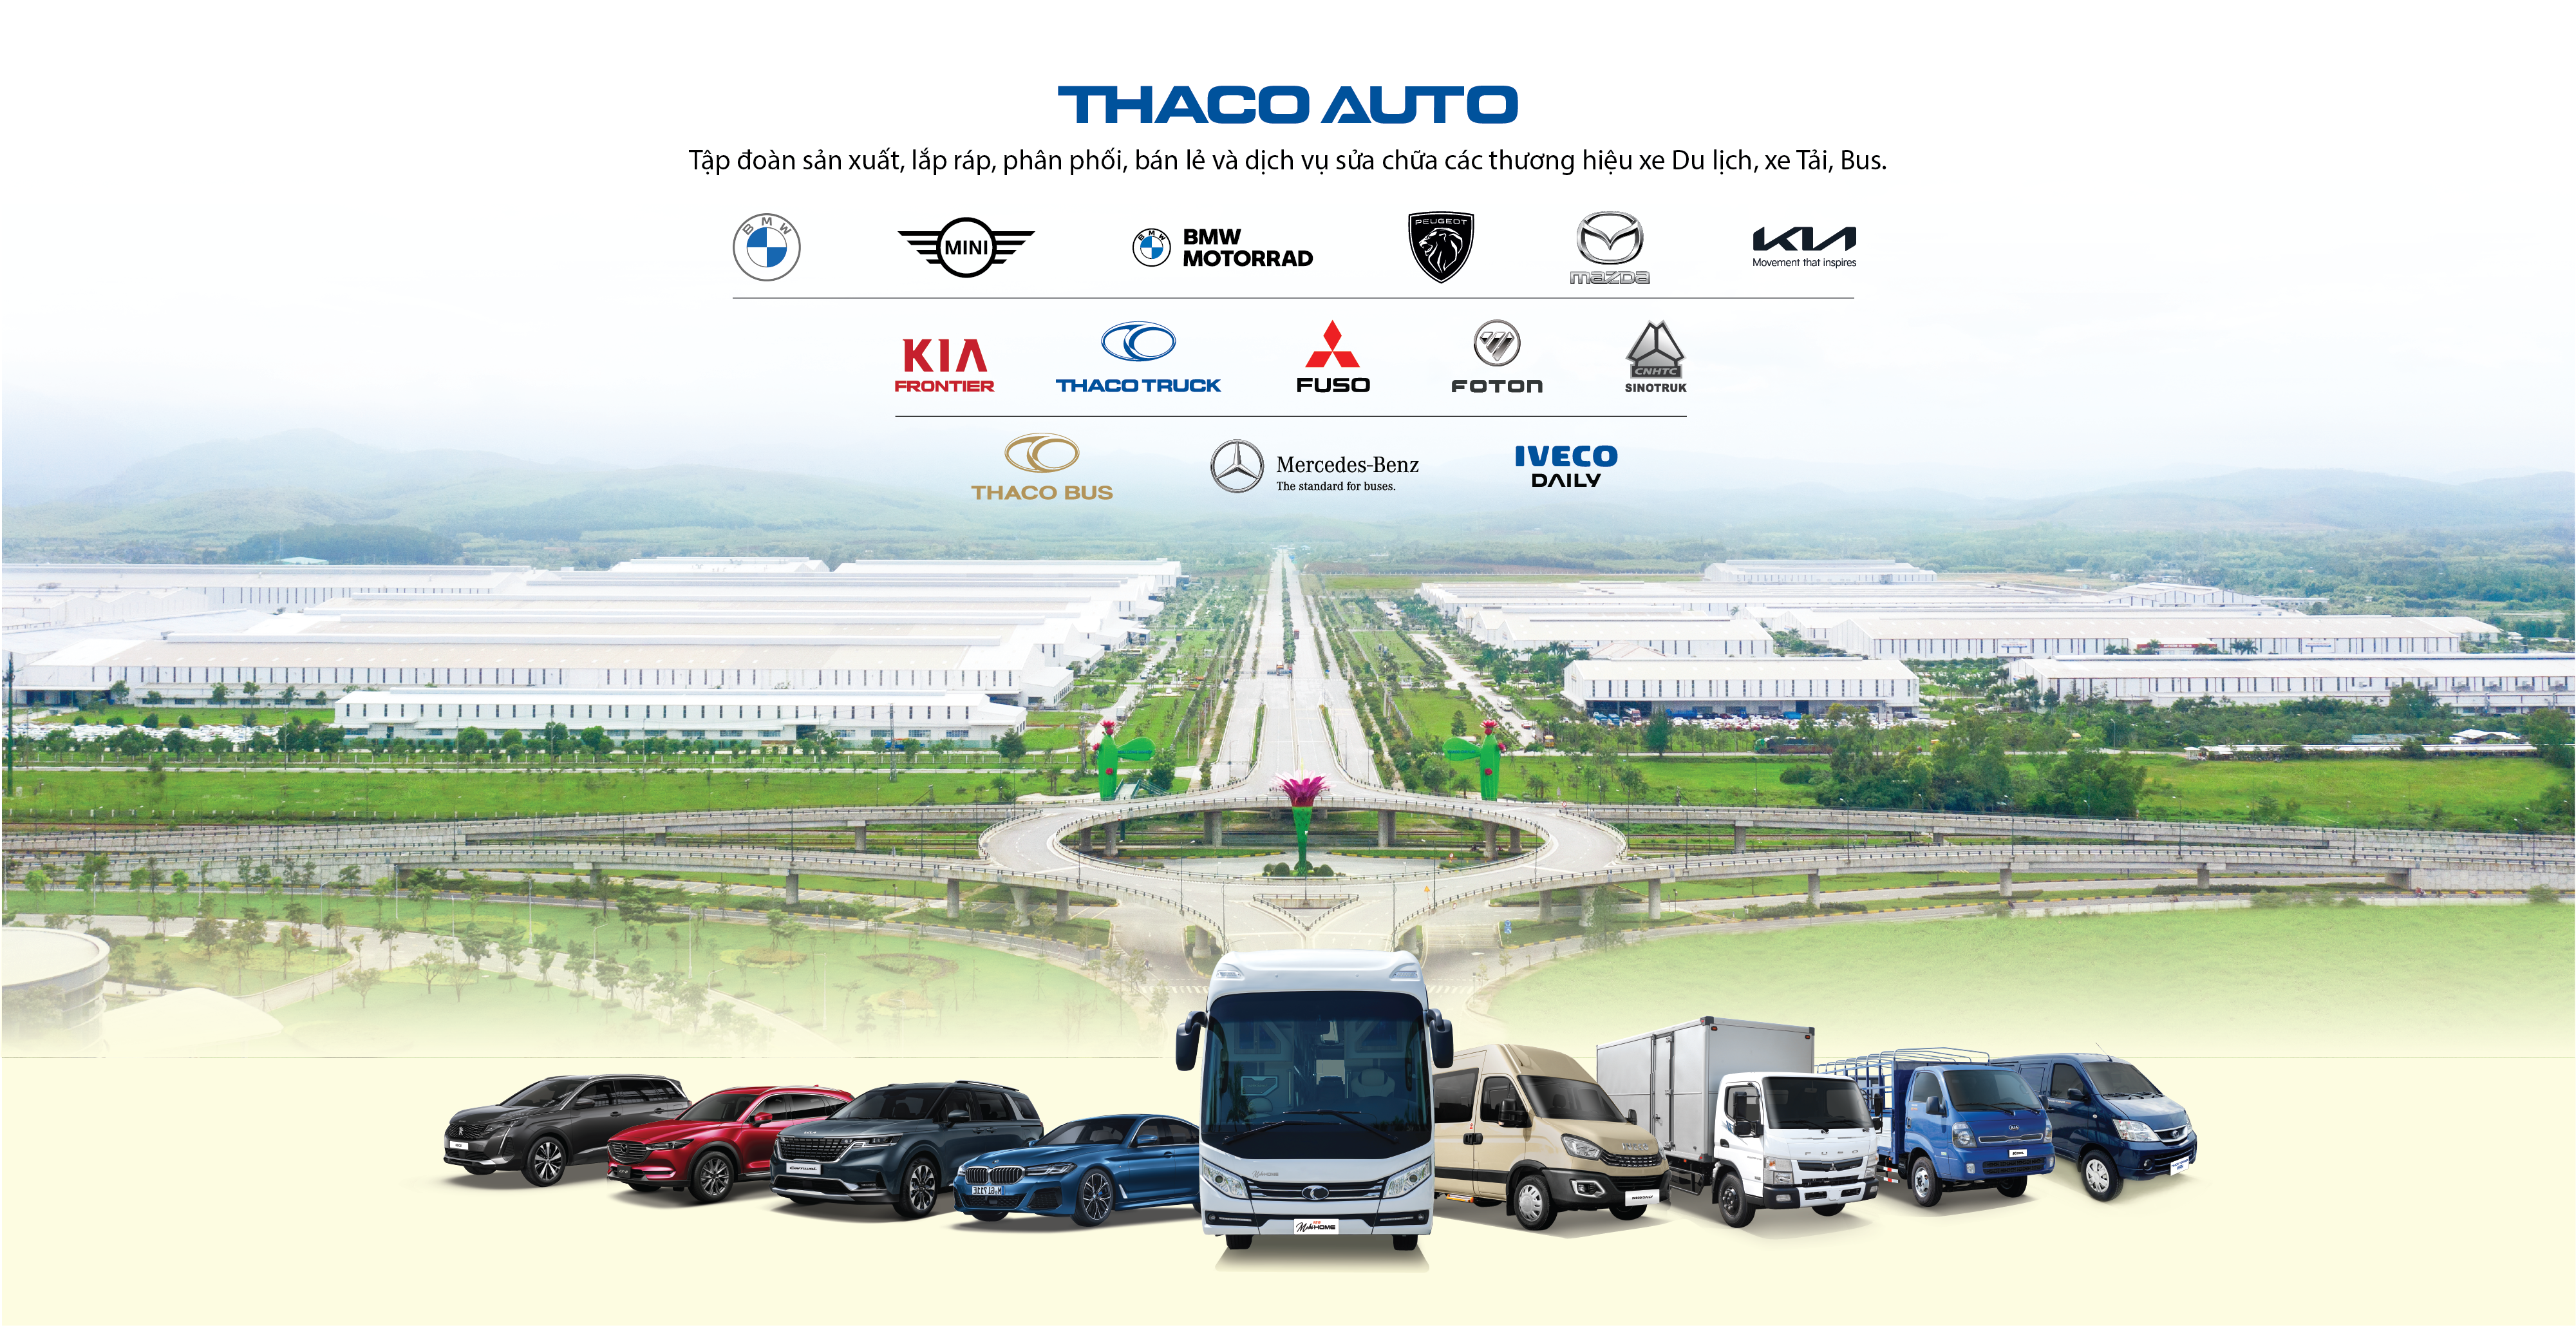 Project 1: TIGHTENING SOLUTIONS FOR THACO AUTO FACTORY